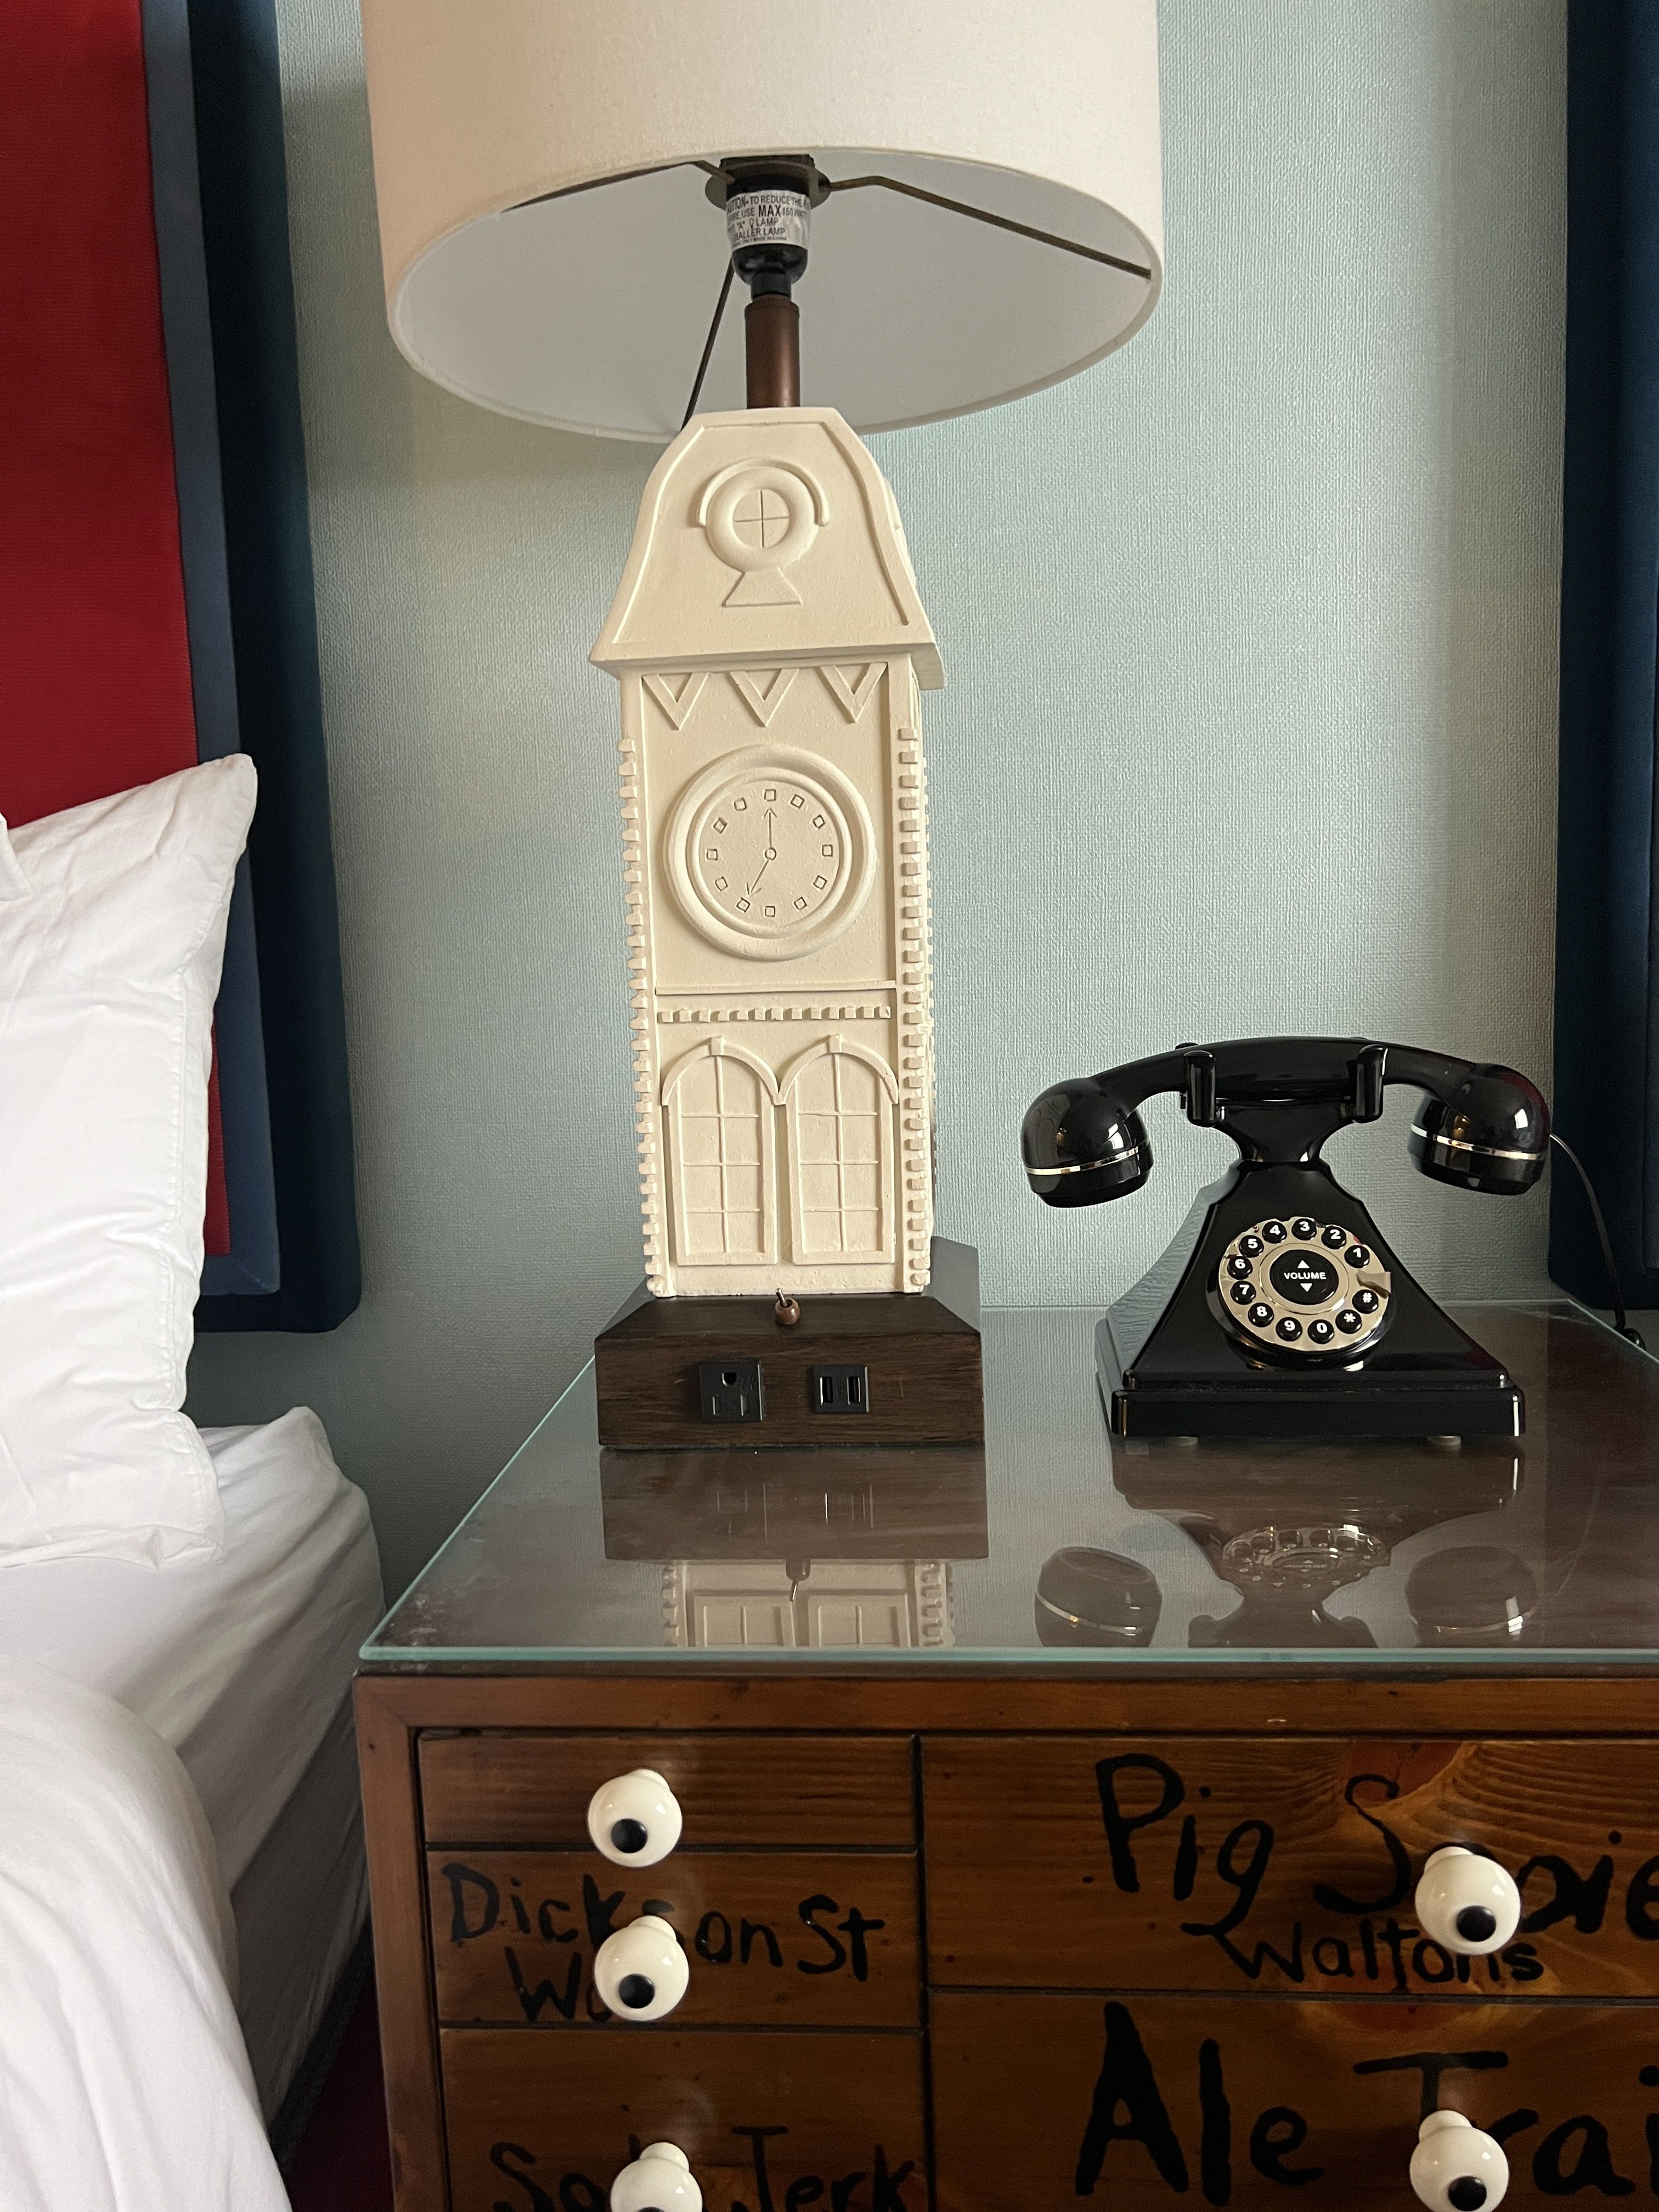 nightstand in hotel room with rotary phone